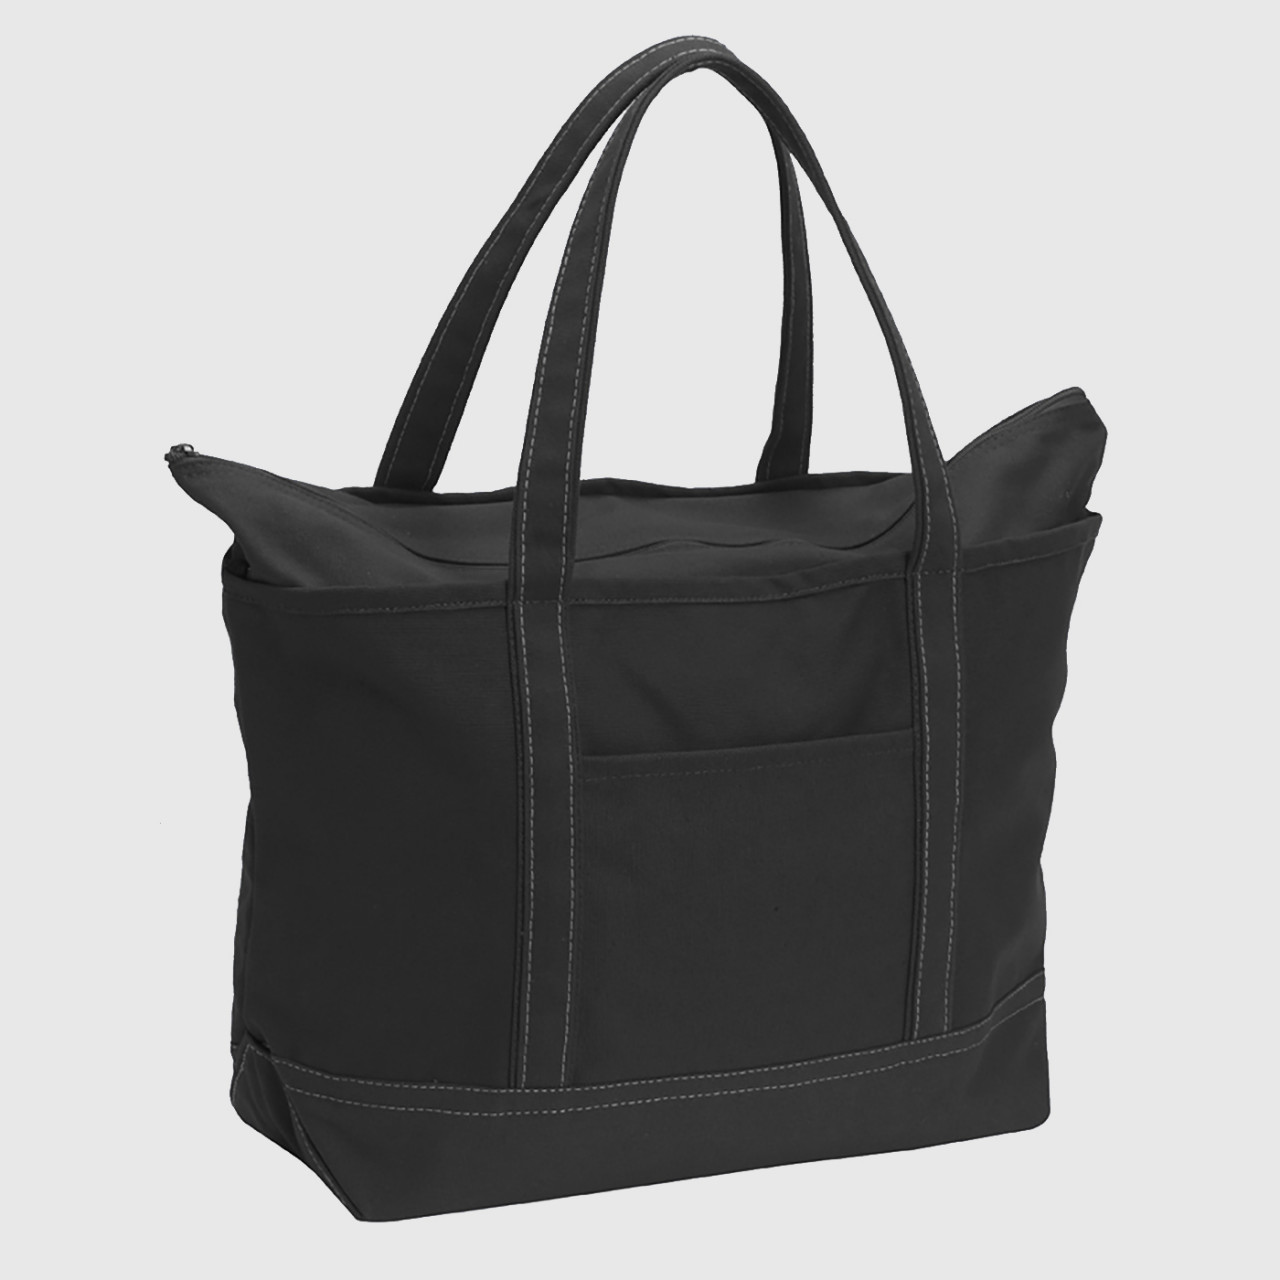 Rock the Boat Bag | Black | Satchels NY Bags | Products | A leading ...